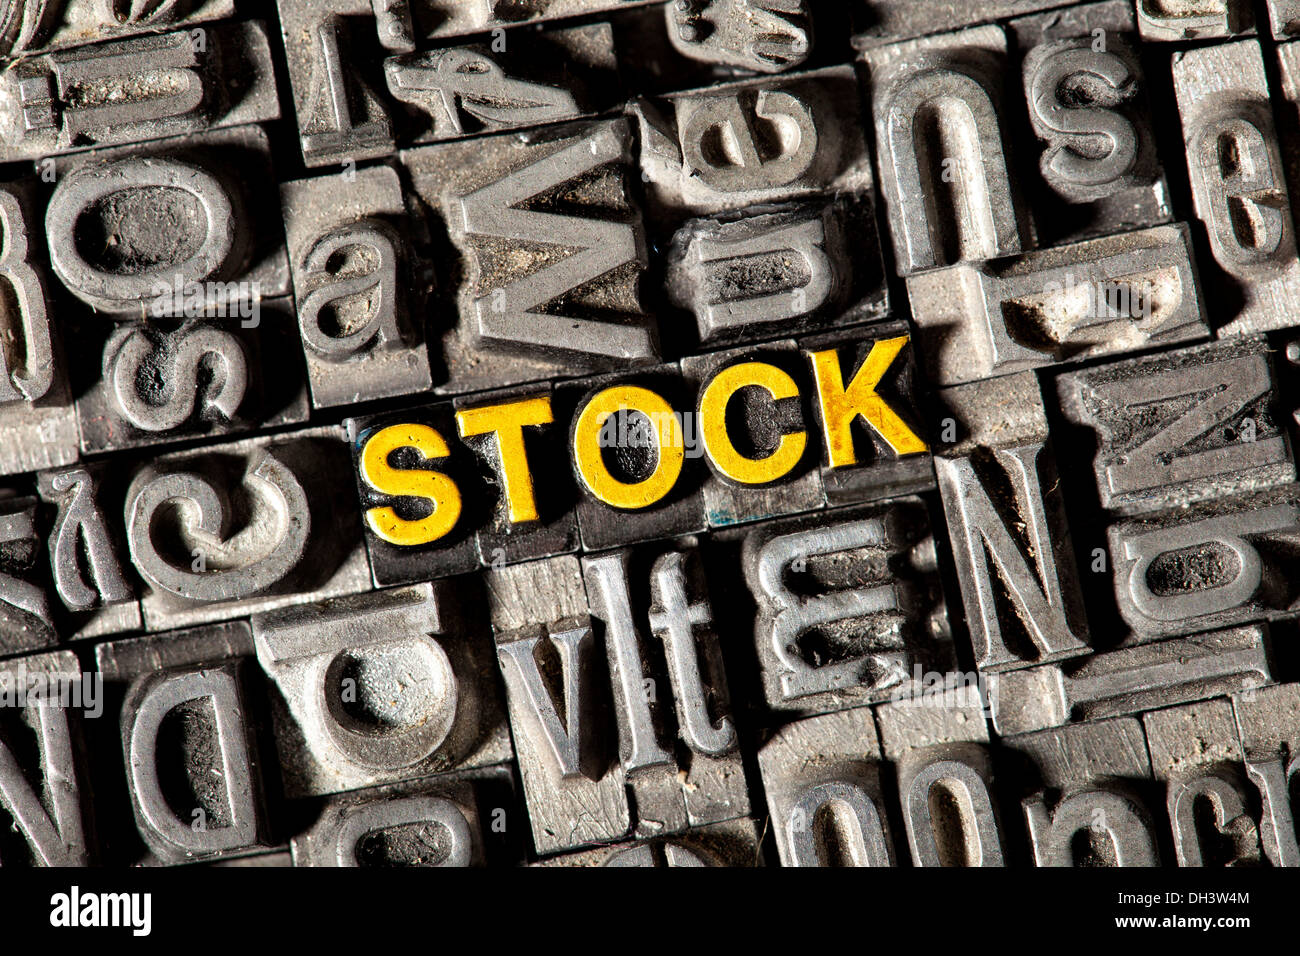 Old lead letters forming the word 'STOCK' Stock Photo